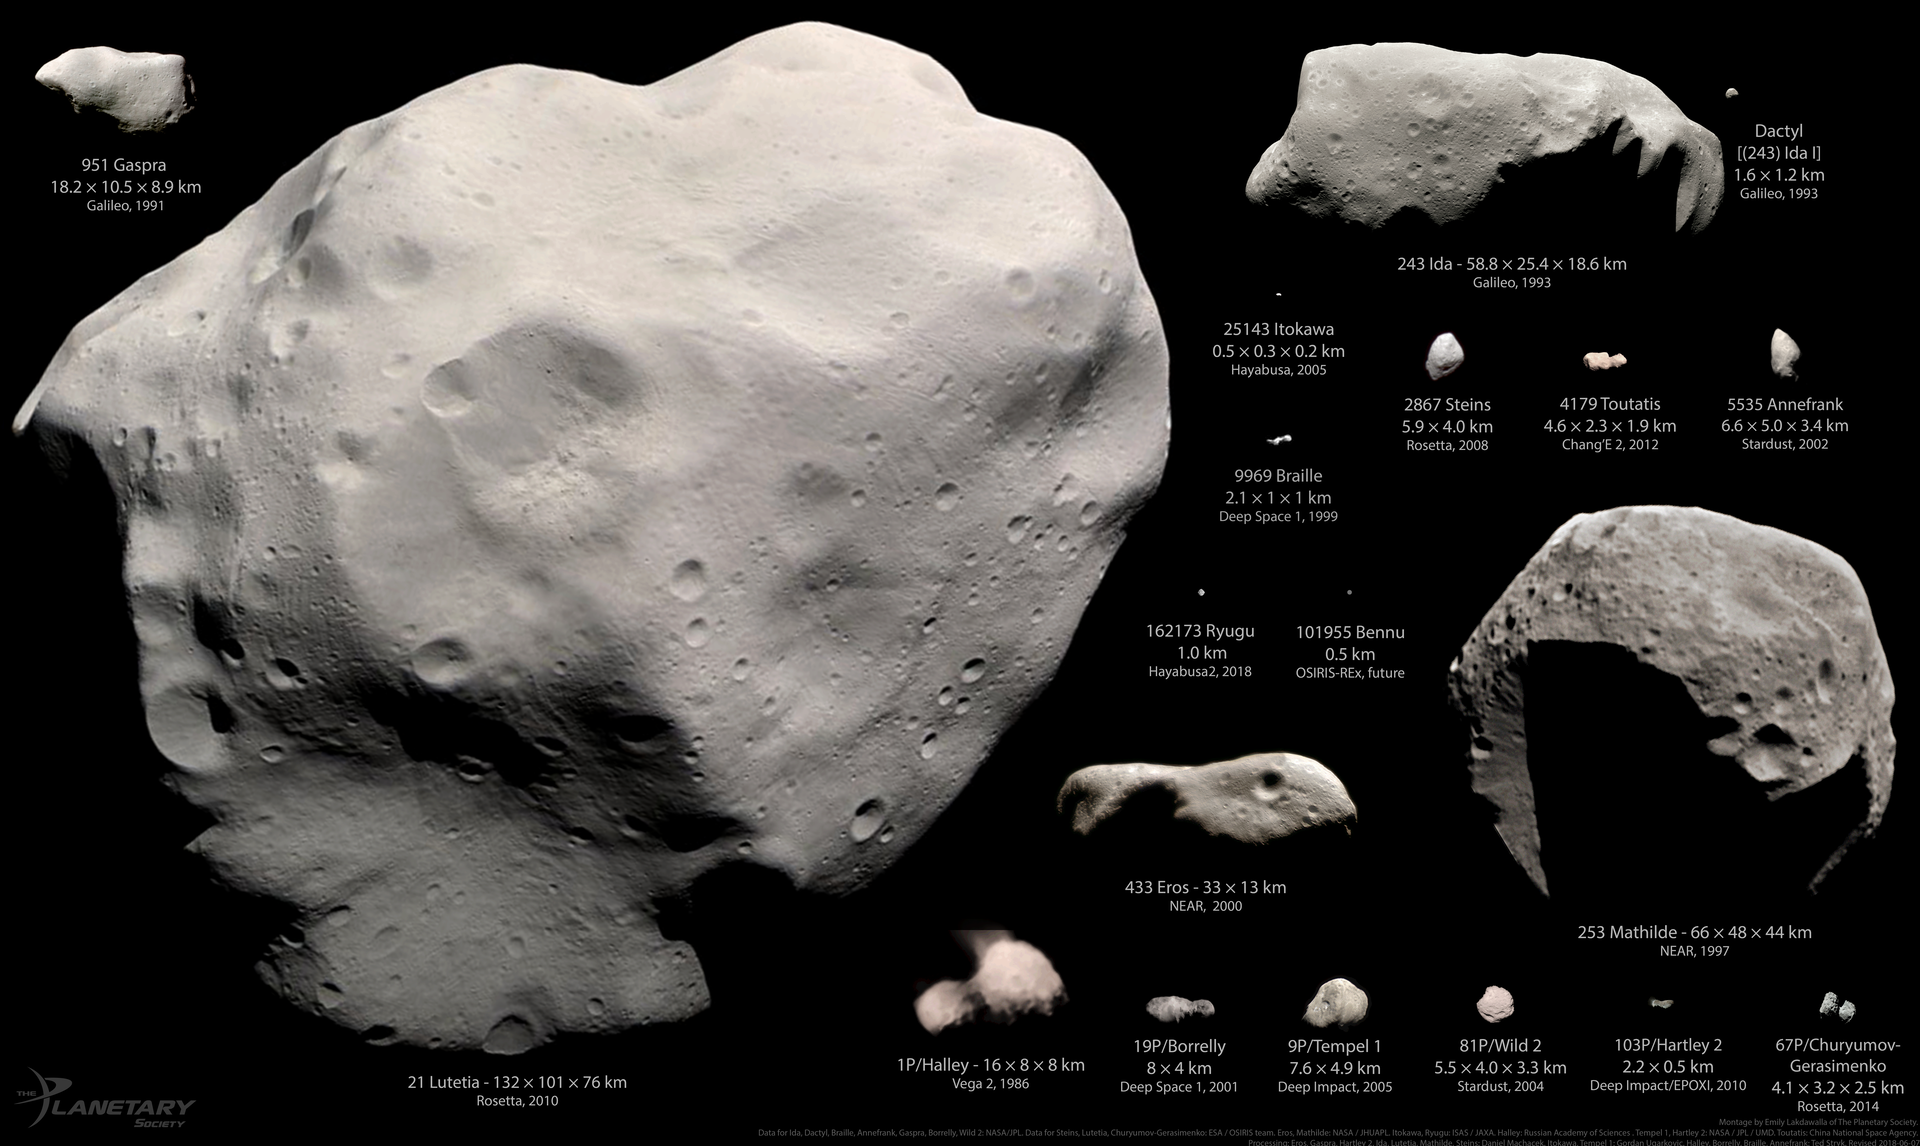 Asteroids and comets visited by spacecraft